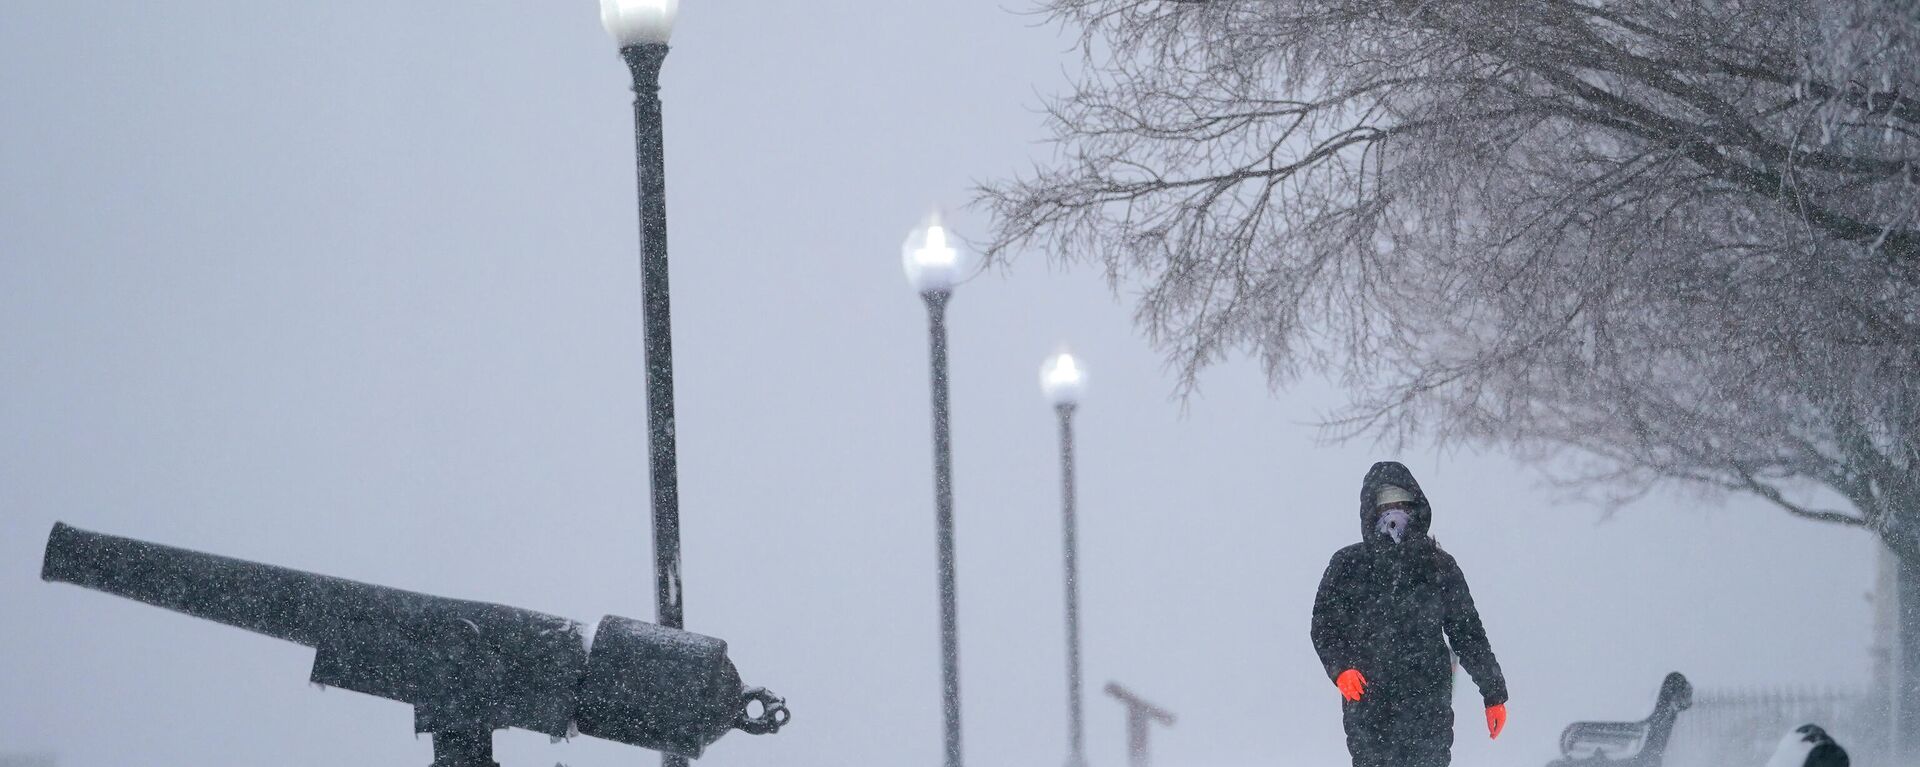 Snow blows sideways in gusty wind as Karla Rivas strolls at Federal Hill Park, Monday, Jan. 3, 2022, in Baltimore. Rivas, who is originally from Miami, said this was her first snow storm. - Sputnik International, 1920, 03.01.2022